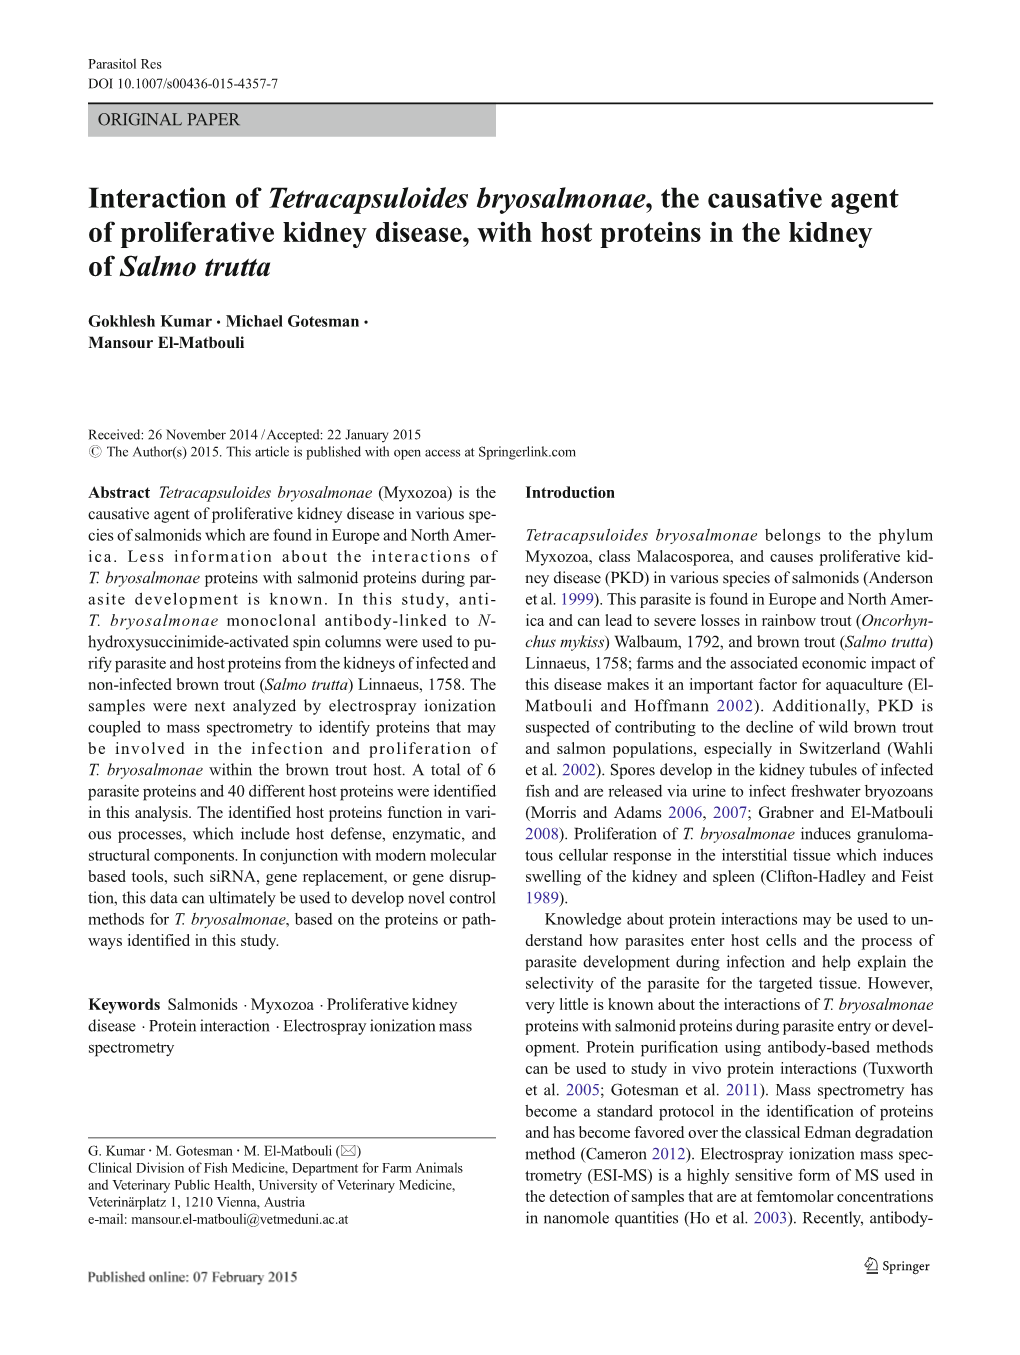 Interaction of Tetracapsuloides Bryosalmonae, the Causative Agent